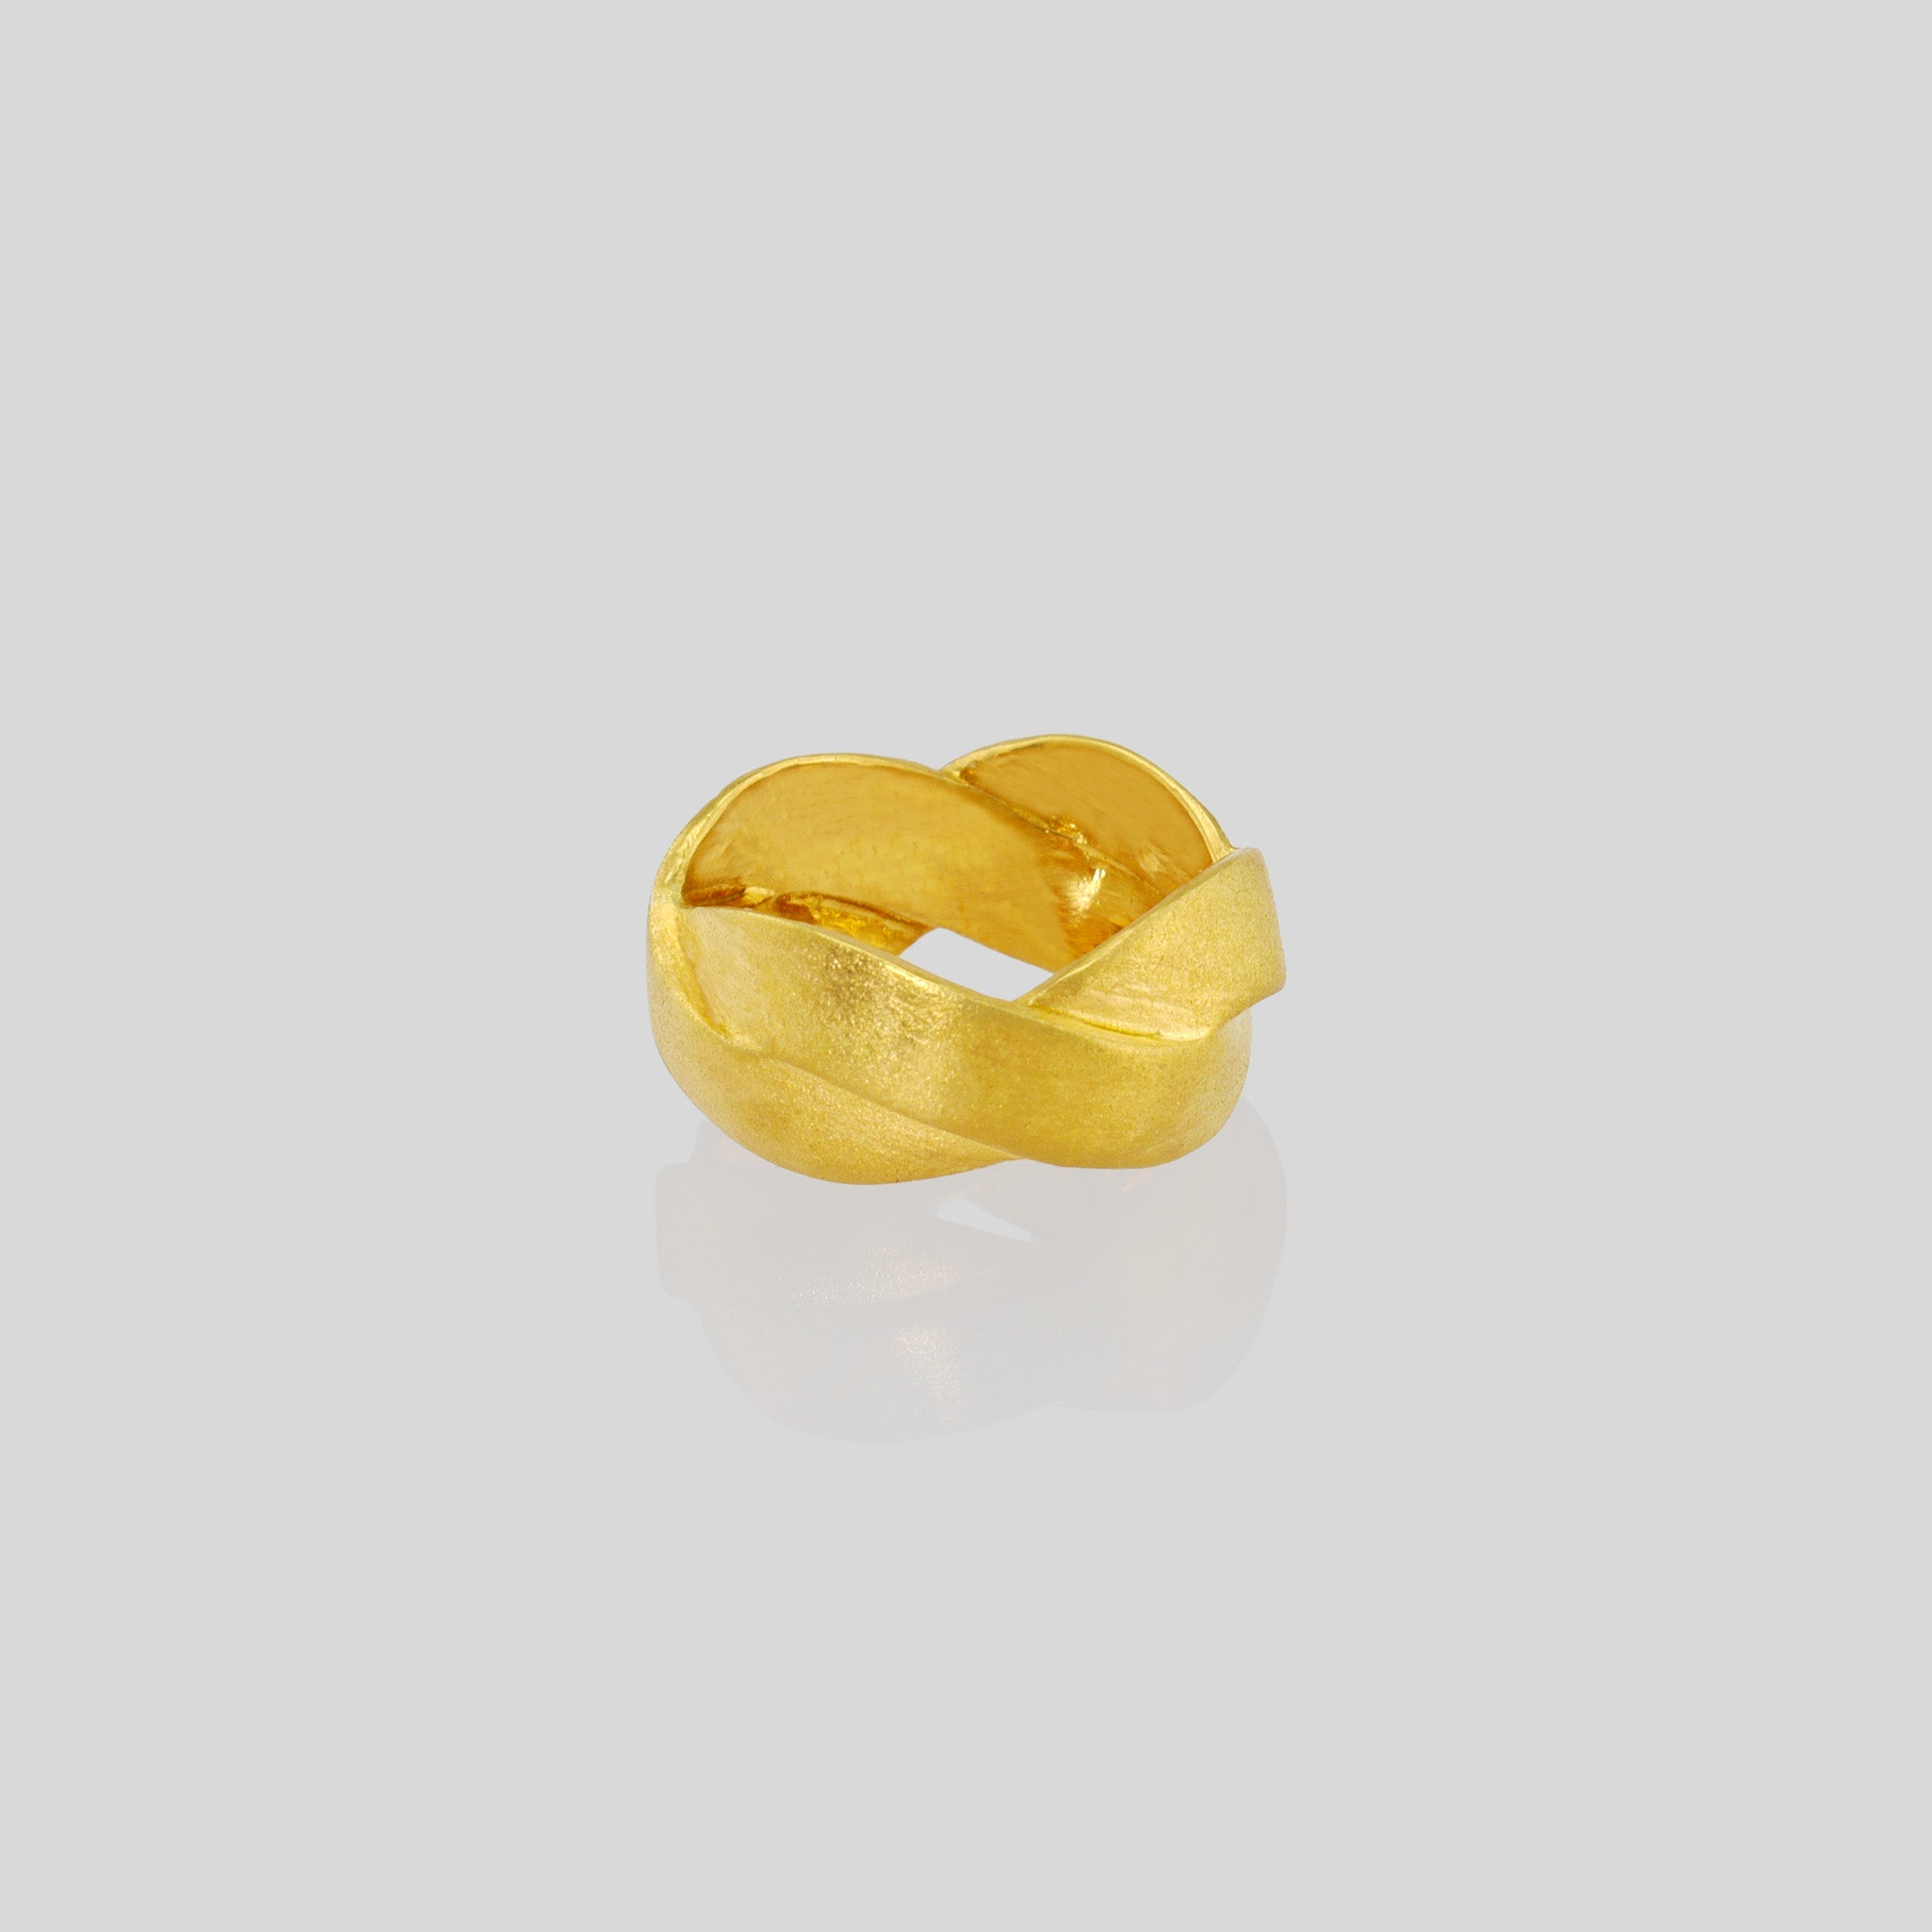 Handmade 18k Gold ring with braided bands, offering an elegant and versatile addition to both everyday wear and special occasions. A timeless classic with a unique twist.